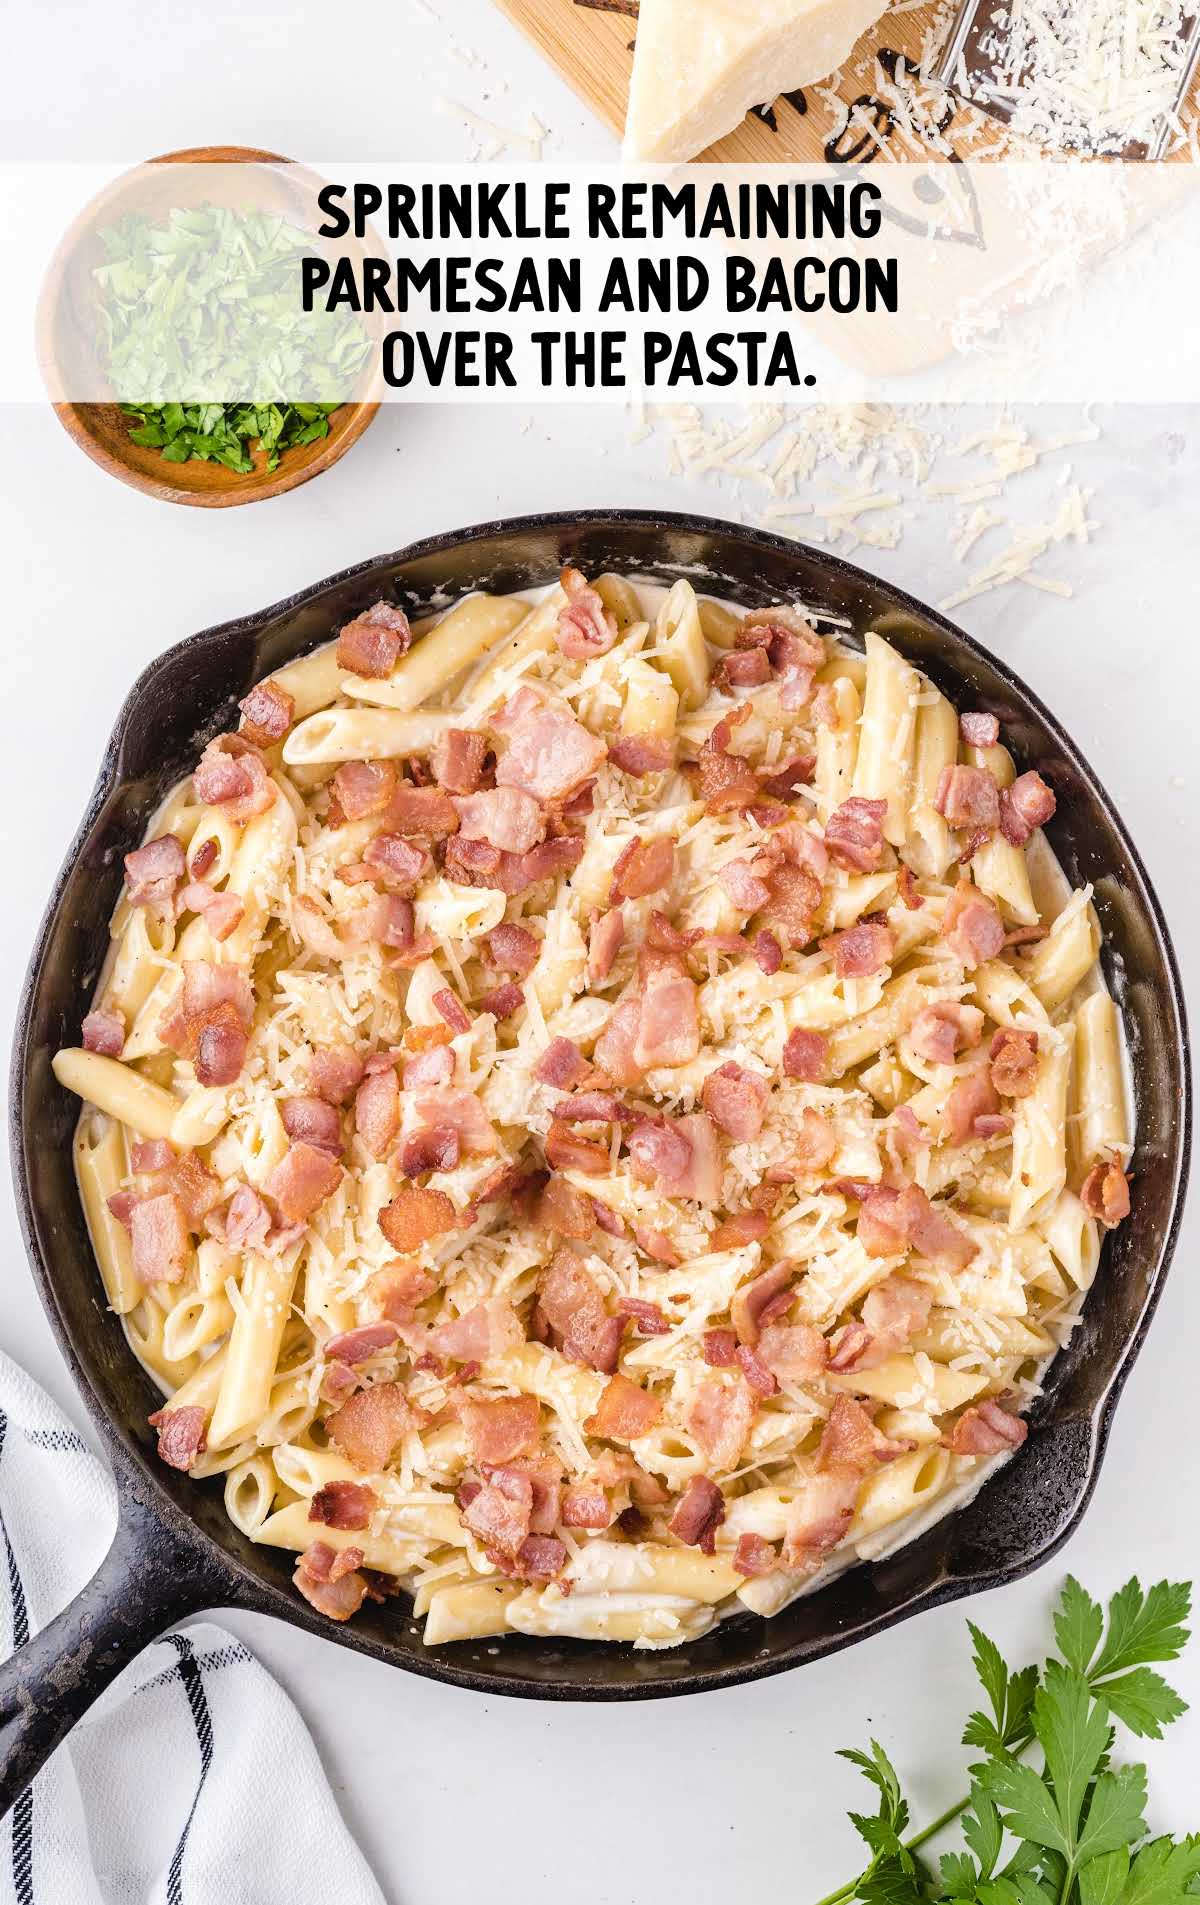 parmesan cheese and bacon sprinkled over the pasta in a skillet